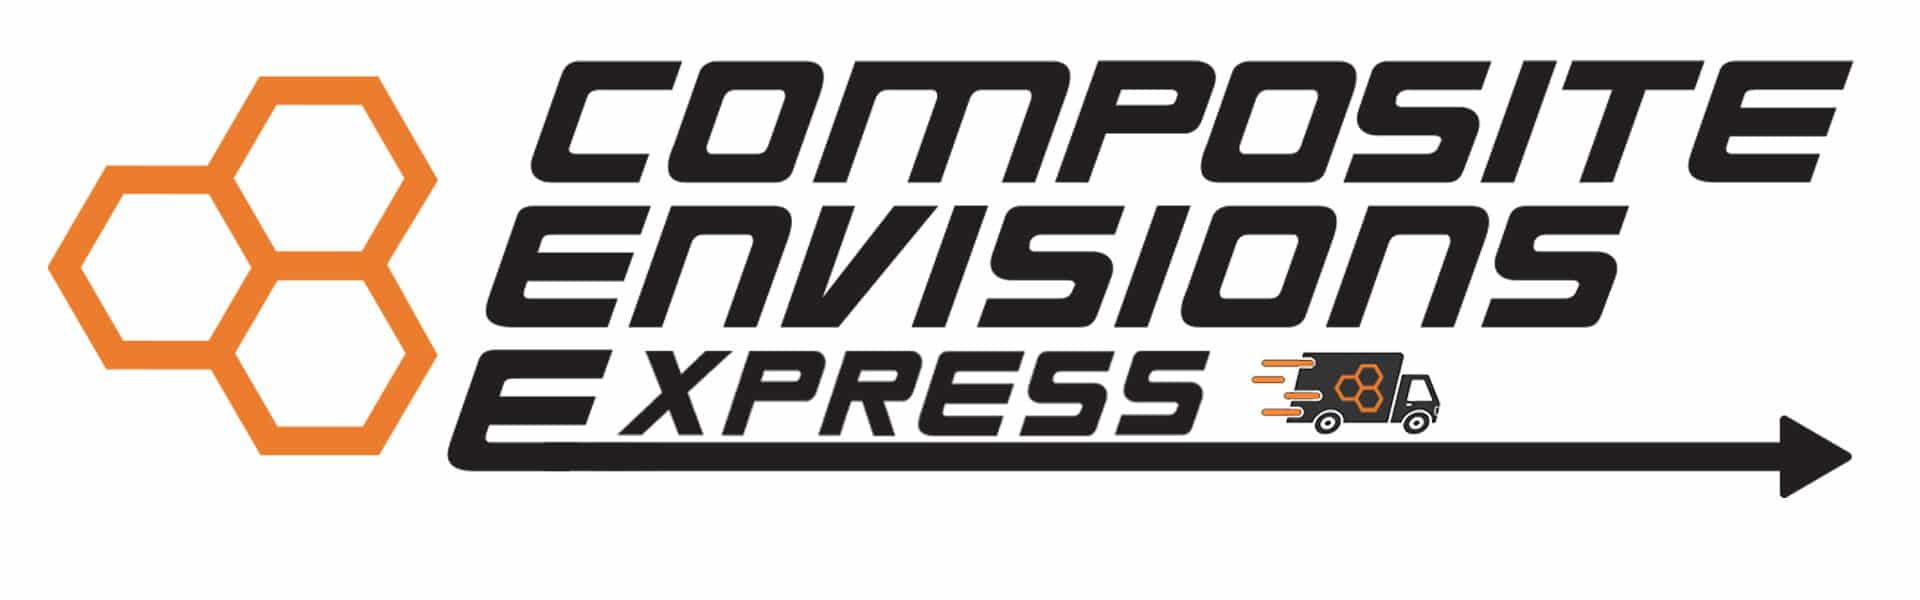 Composite Envisions Express!